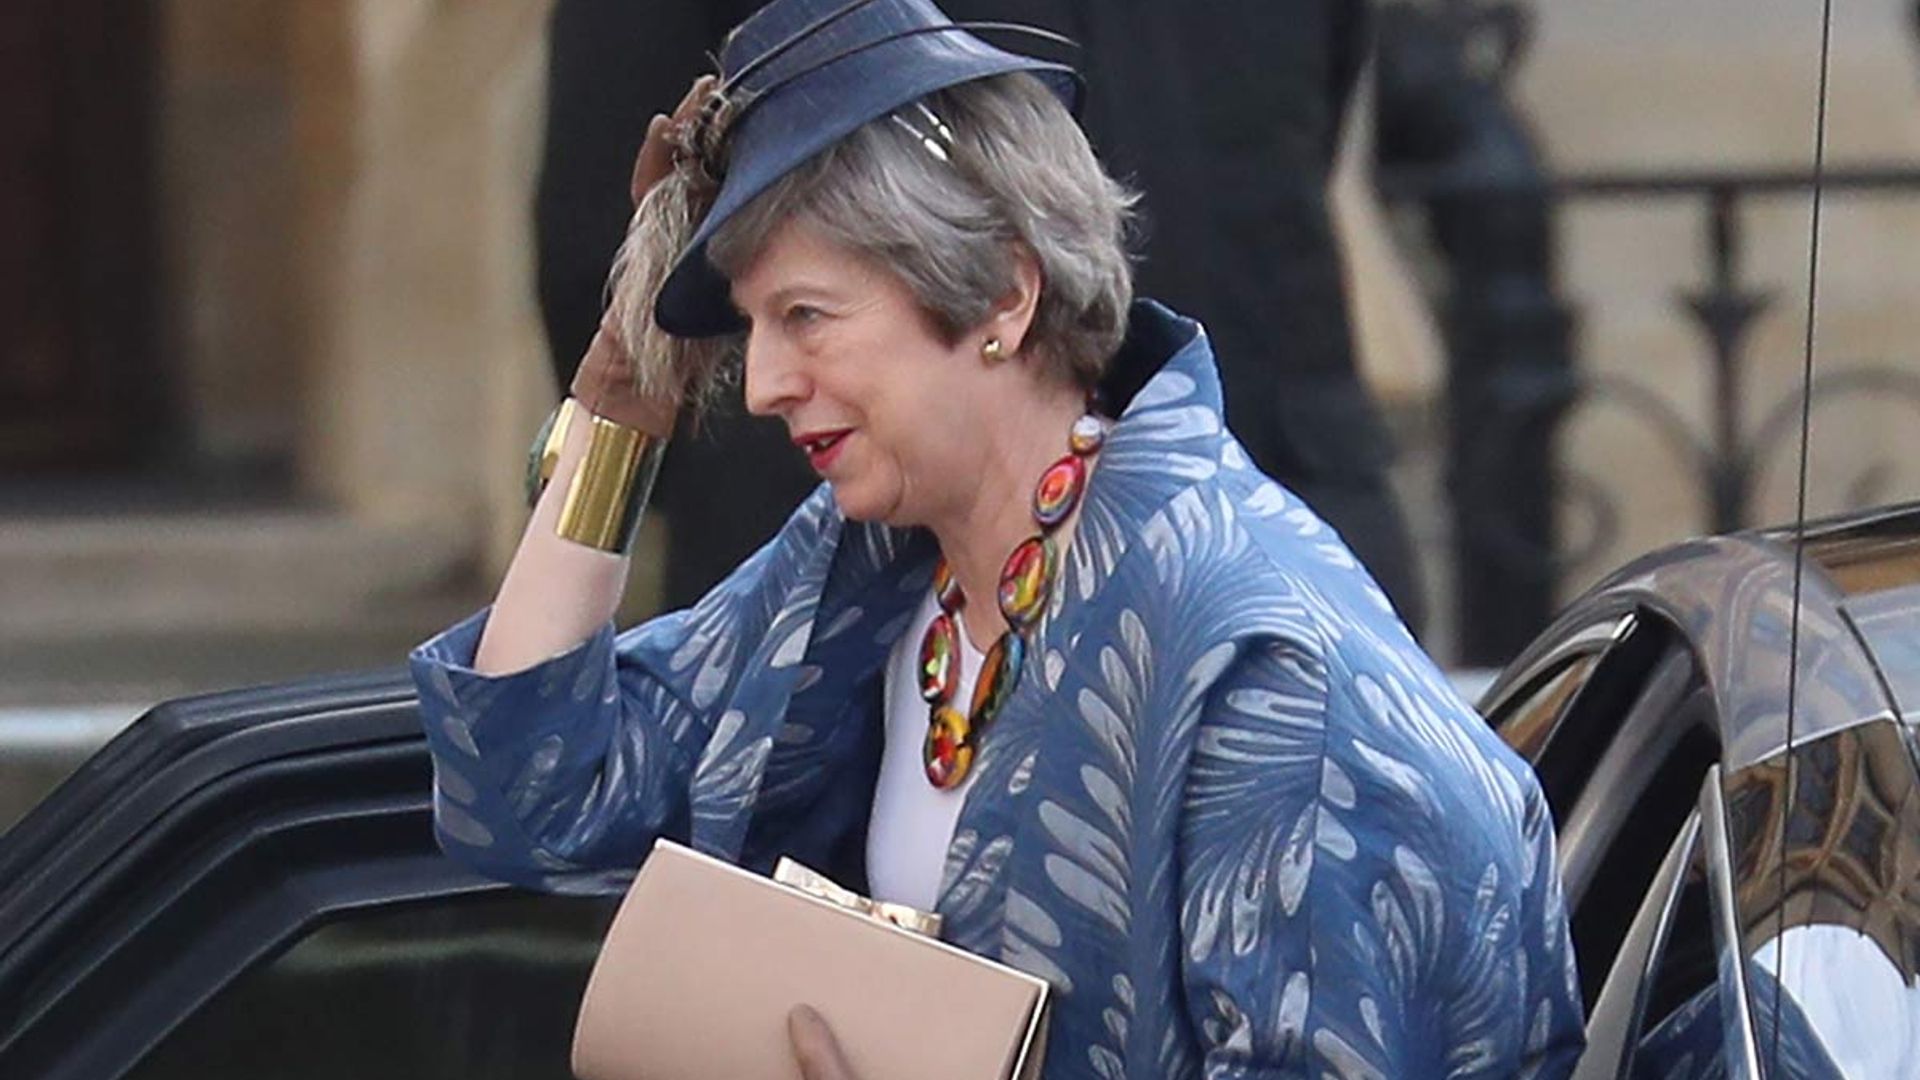 Breezy not Brexit! Theresa May battles with her hat as she mingles with the royal family at the CommonWealth